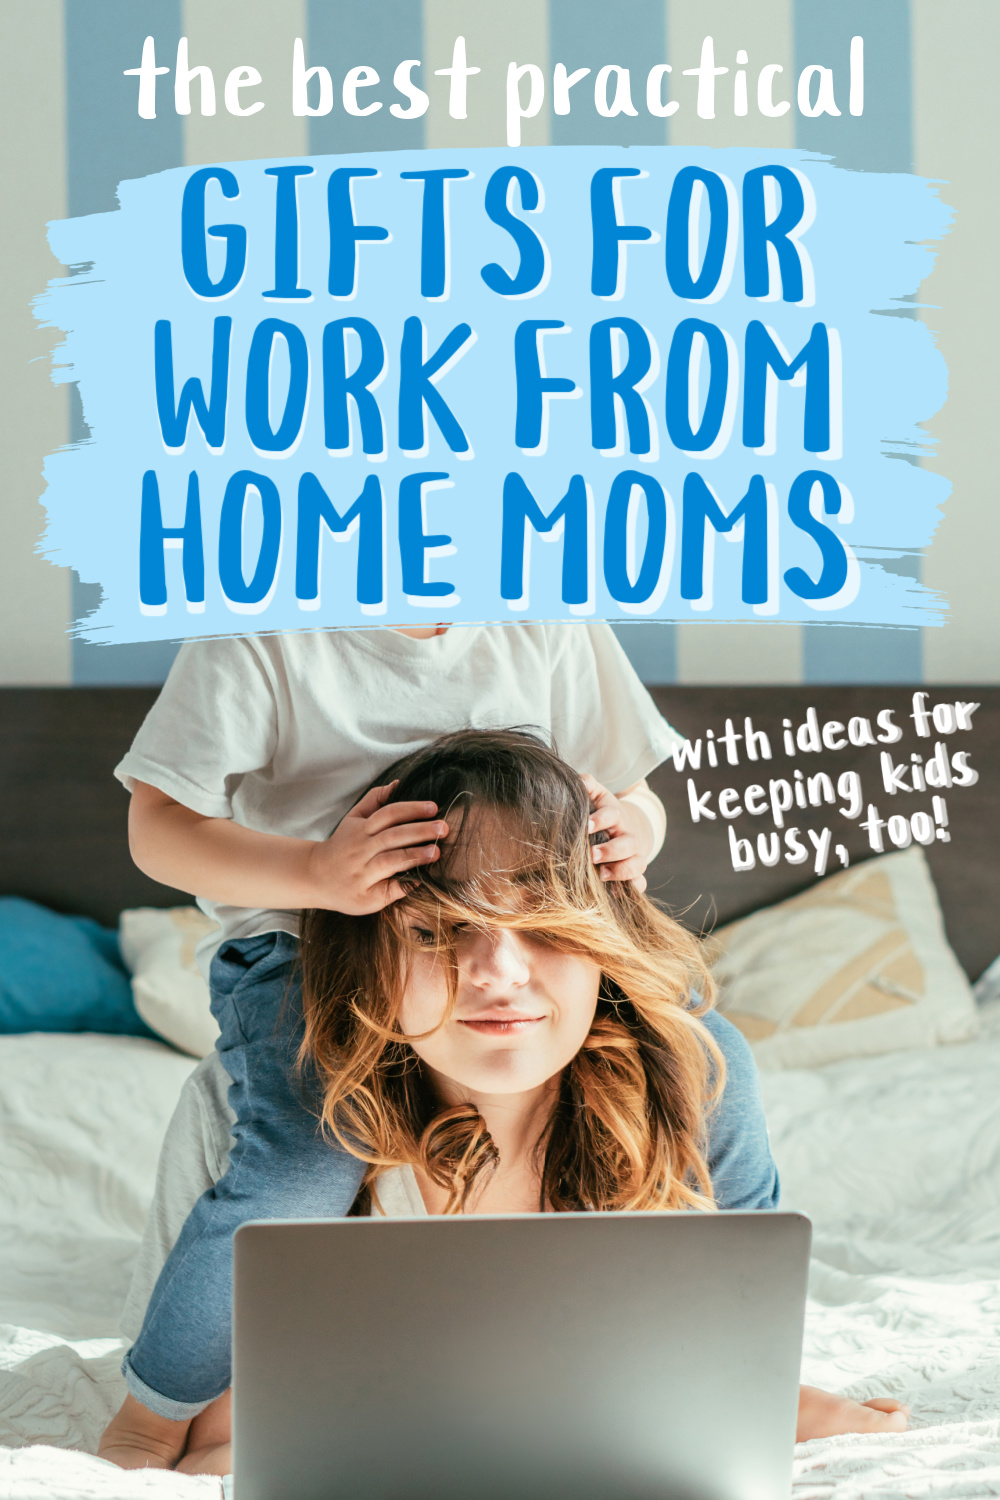 https://www.thissimplebalance.com/wp-content/uploads/2022/07/best-gifts-for-work-at-home-moms.jpeg